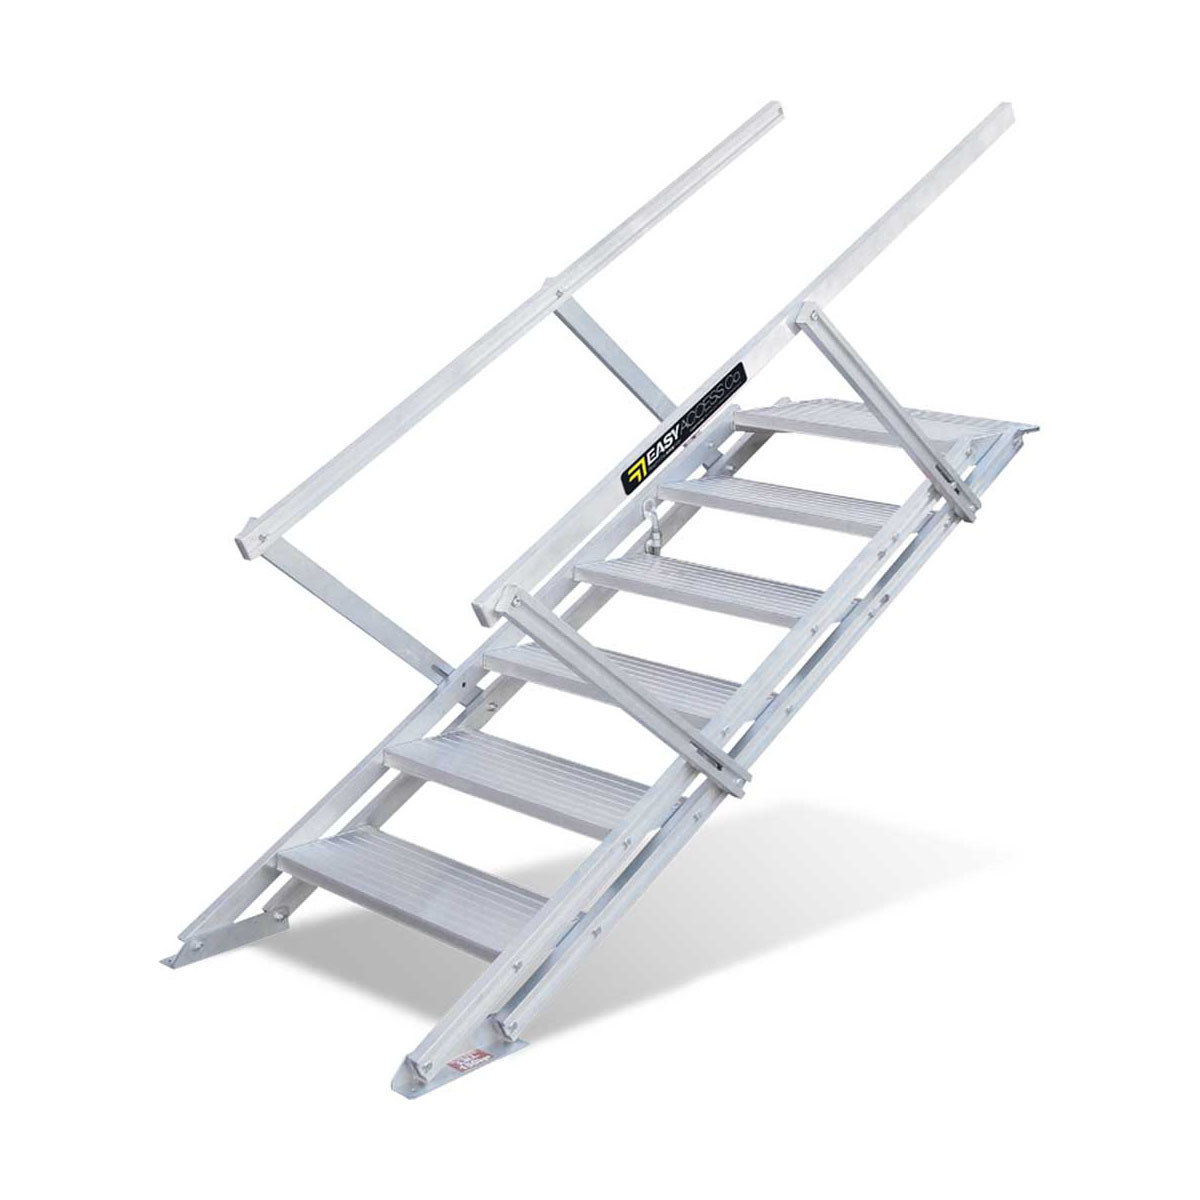 Buy Self-levelling Stairs - Portable Truck Access in Stairs and Truck Access from Easy Access available at Astrolift NZ